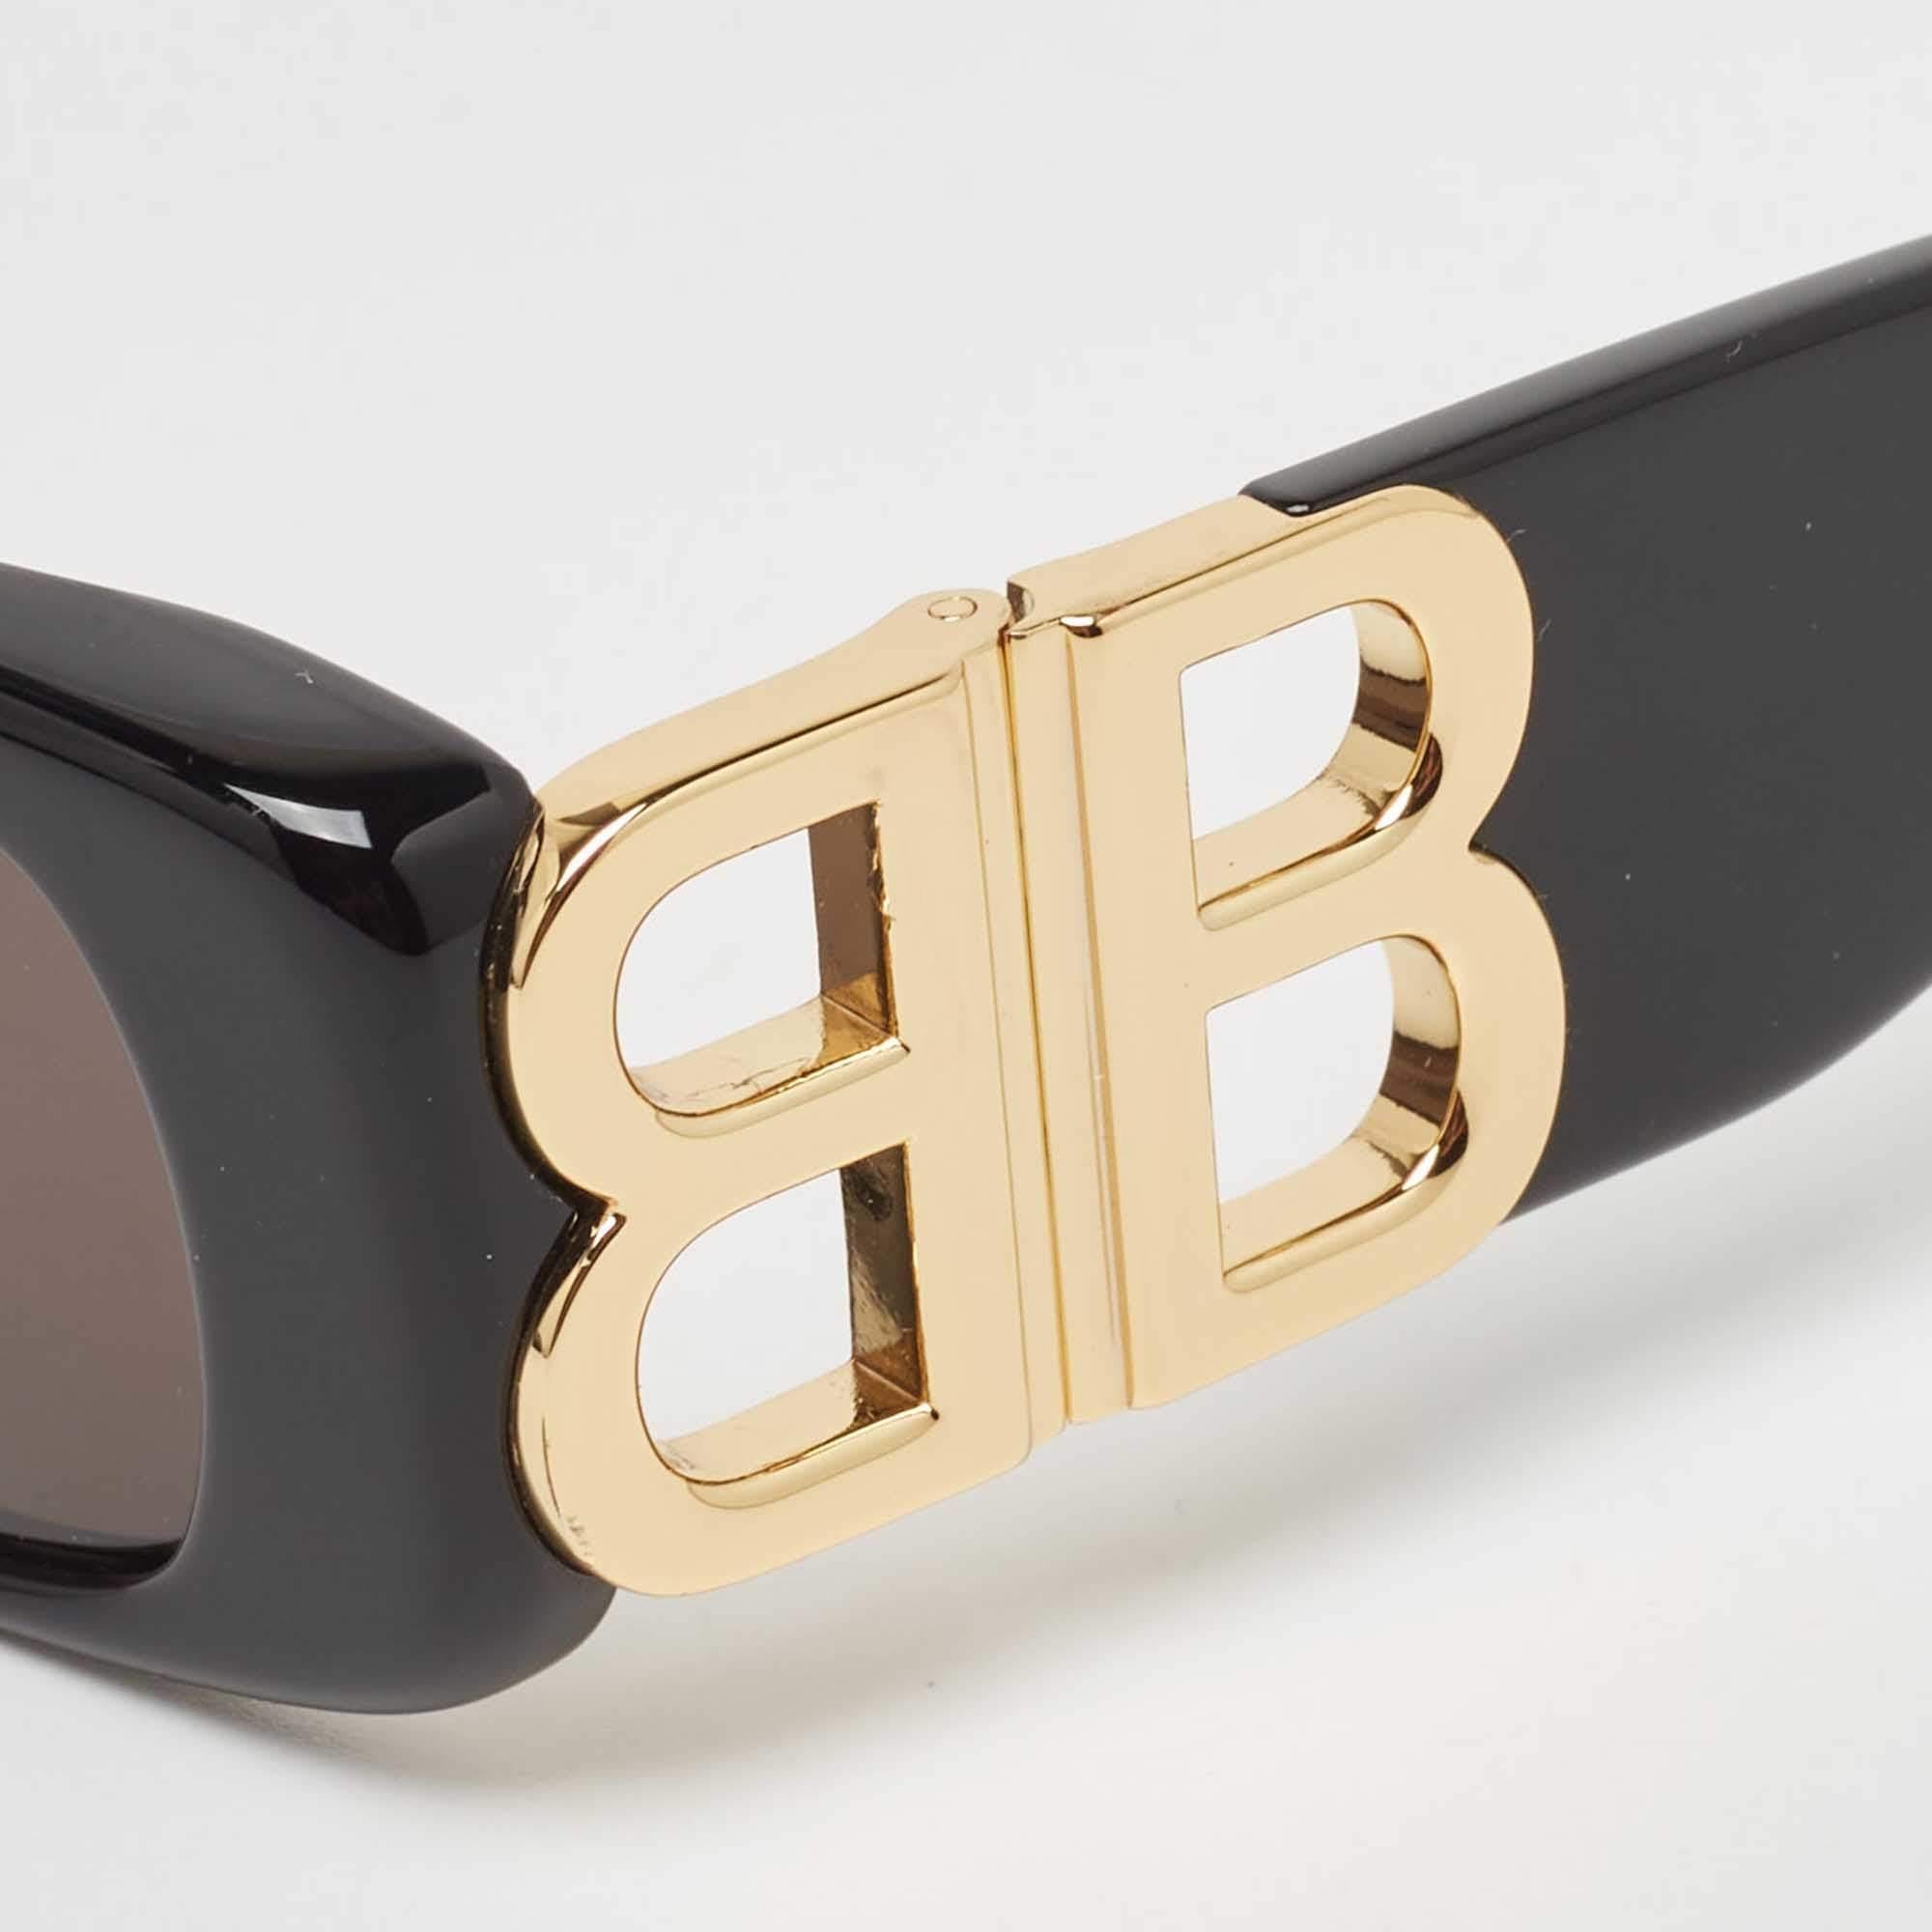 Fashioned to effortlessly express your personal style, these Balenciaga sunglasses carry a black frame with gold-tone metal fittings and the logo on the temples. While its design will make you stand out, the high-quality lenses will protect your